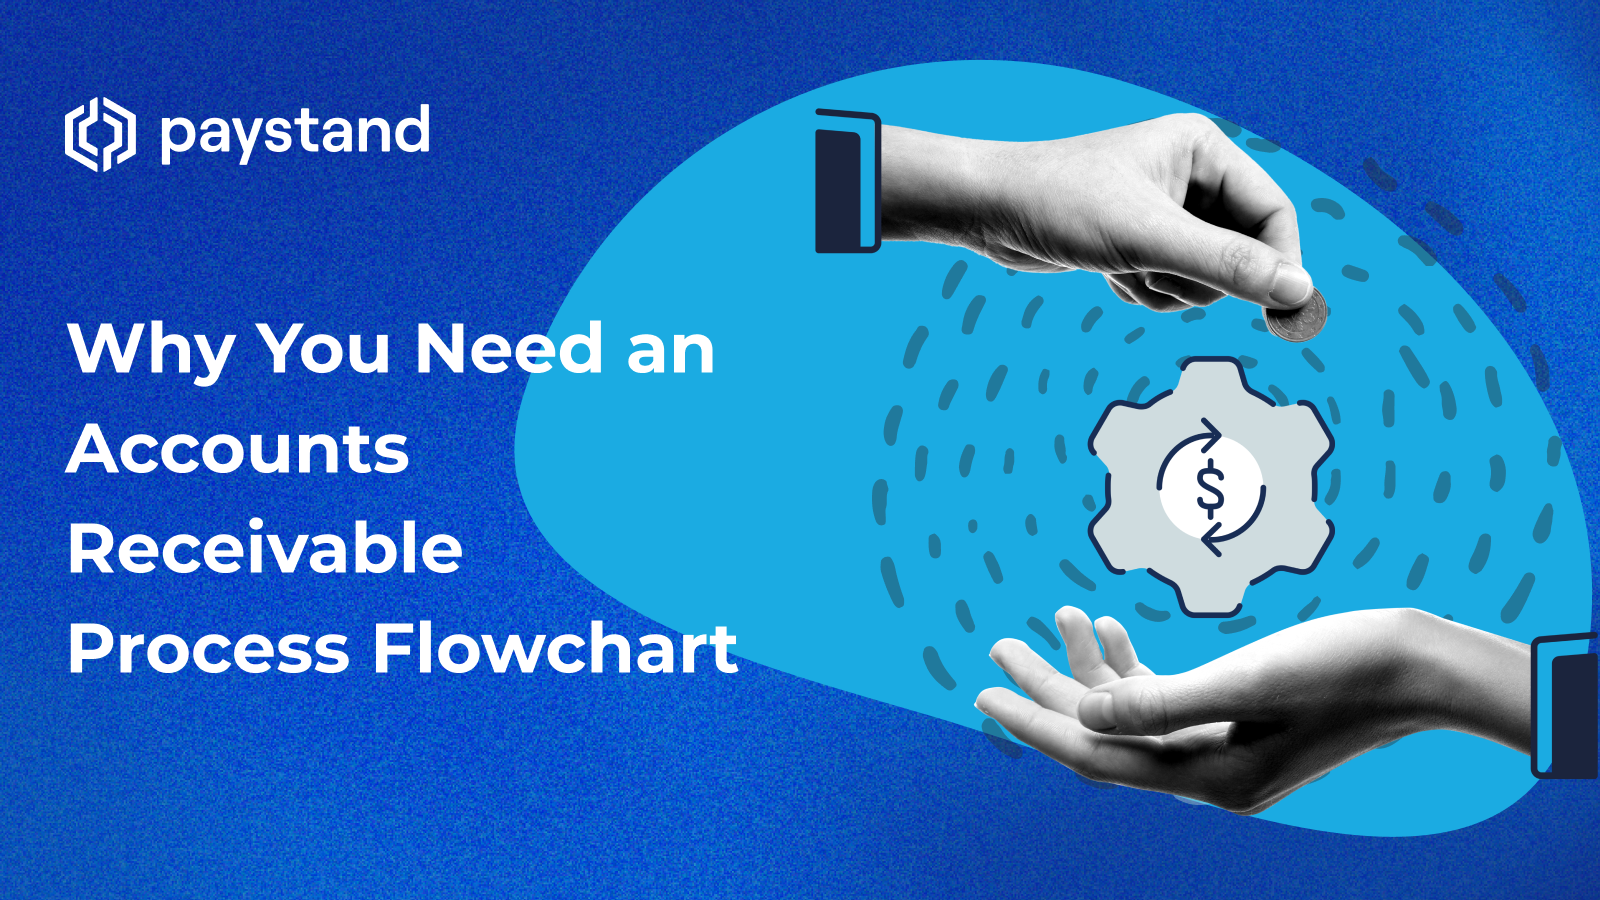 Why You Need an Accounts Receivable Process Flowchart